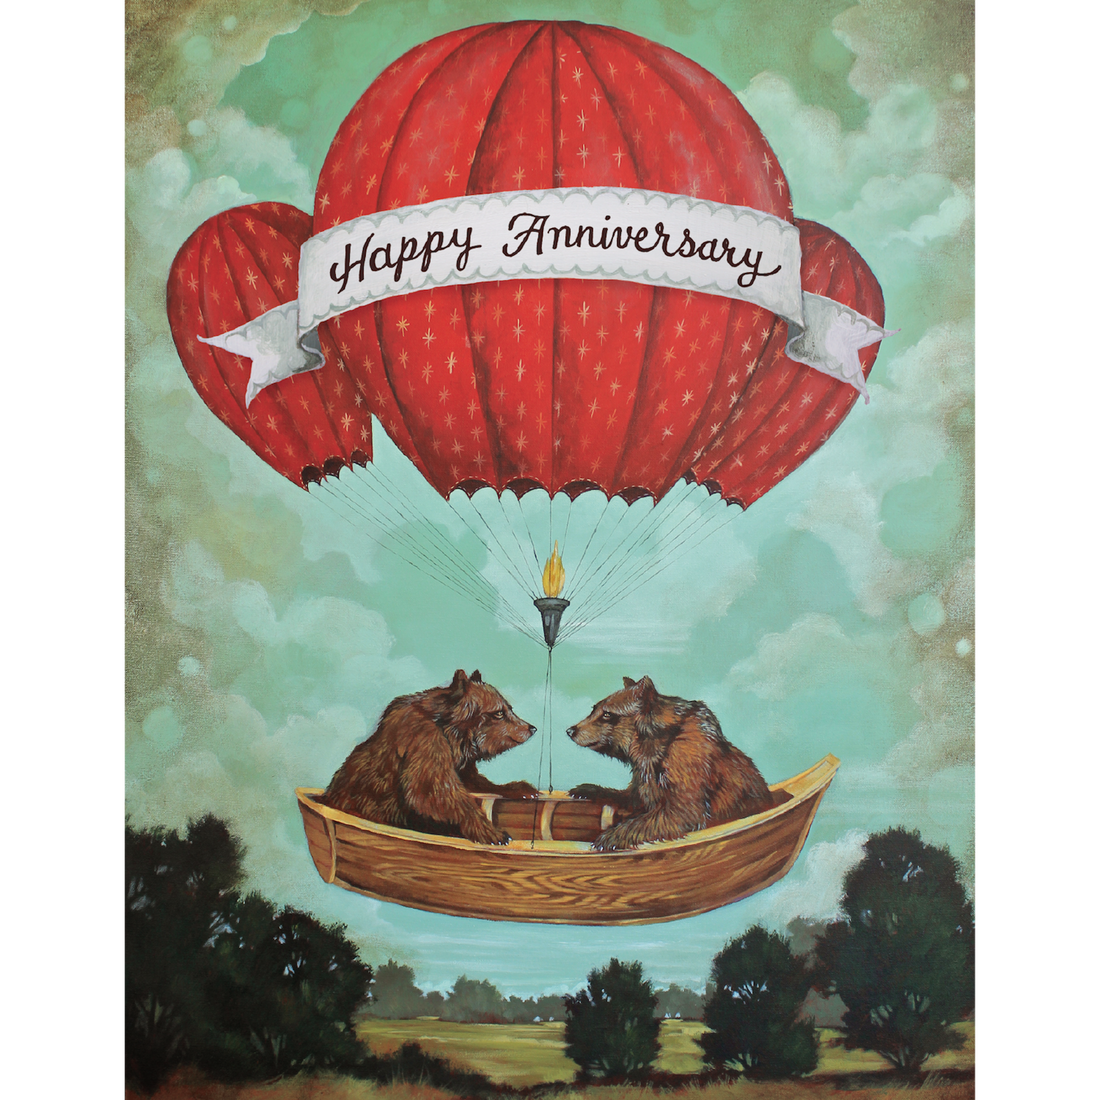 A whimsical illustration of two brown bears sitting in a wooden canoe which is suspended by a red hot air balloon with a ribbon reading &quot;Happy Anniversary&quot; in a teal cloudy sky over a green landscape.